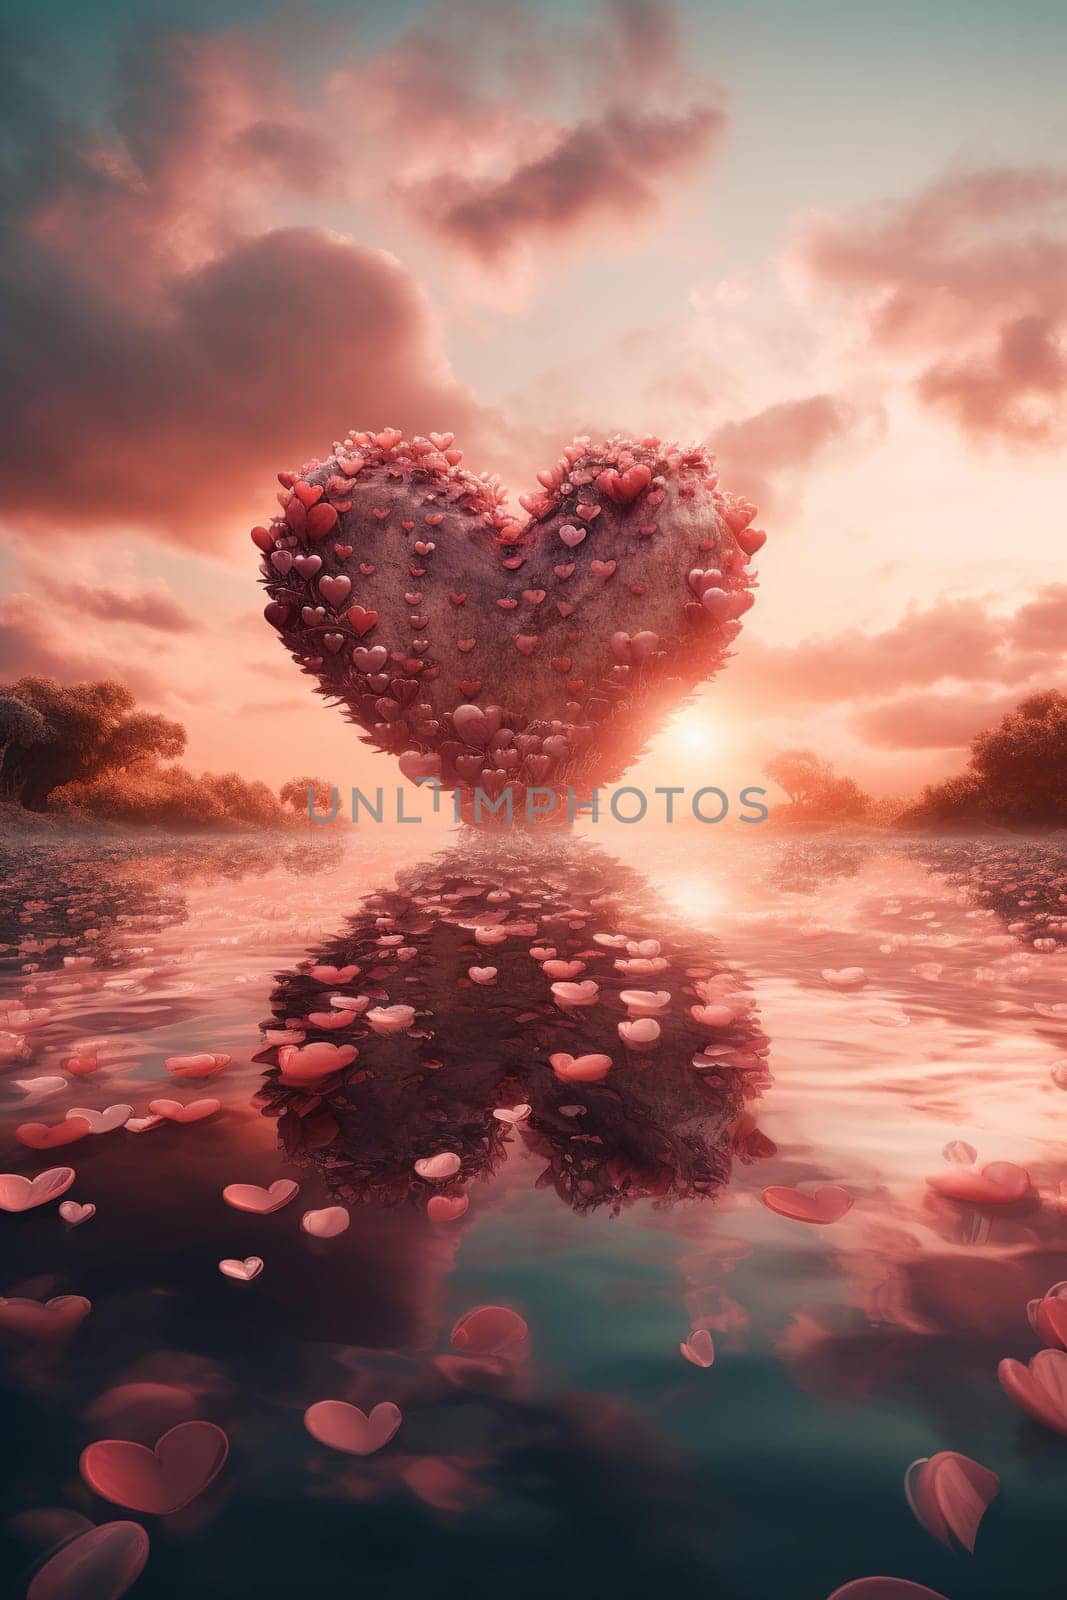 Amazing Landscape View With Pink Heart Shape Under Water Surface by tan4ikk1